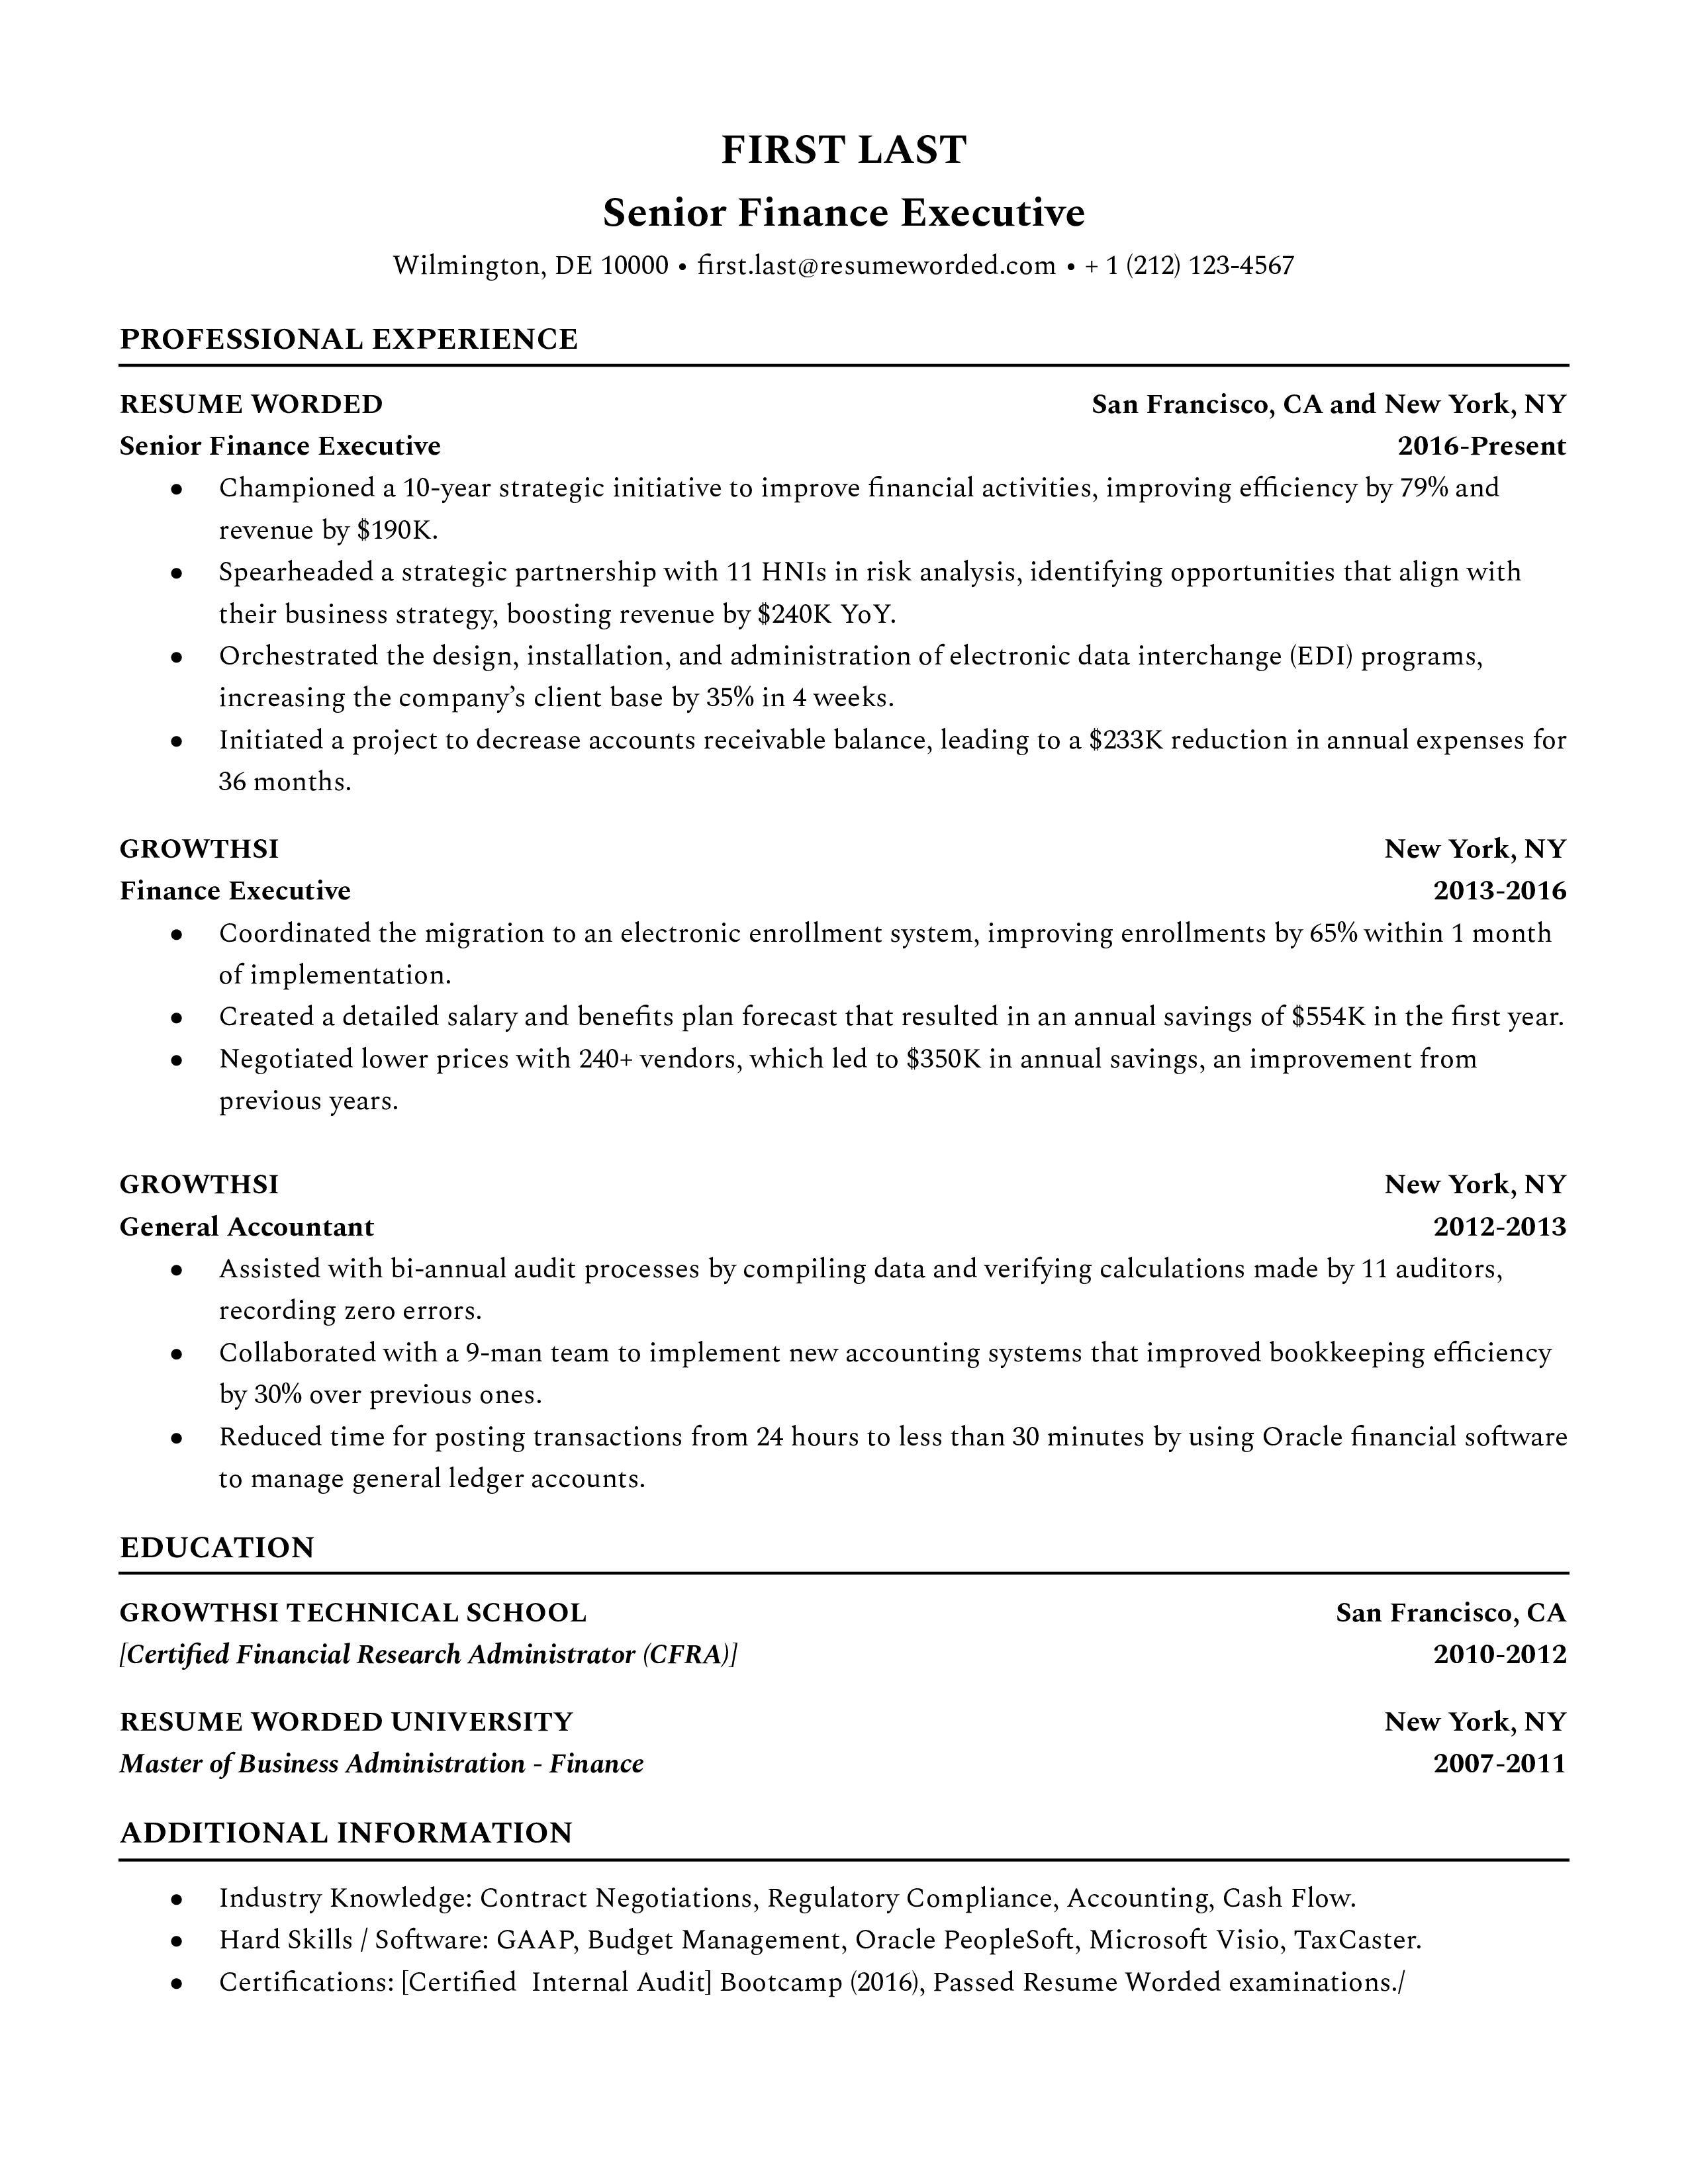 A senior finance executive resume sample that highlights the applicant’s quantifiable success and experience.